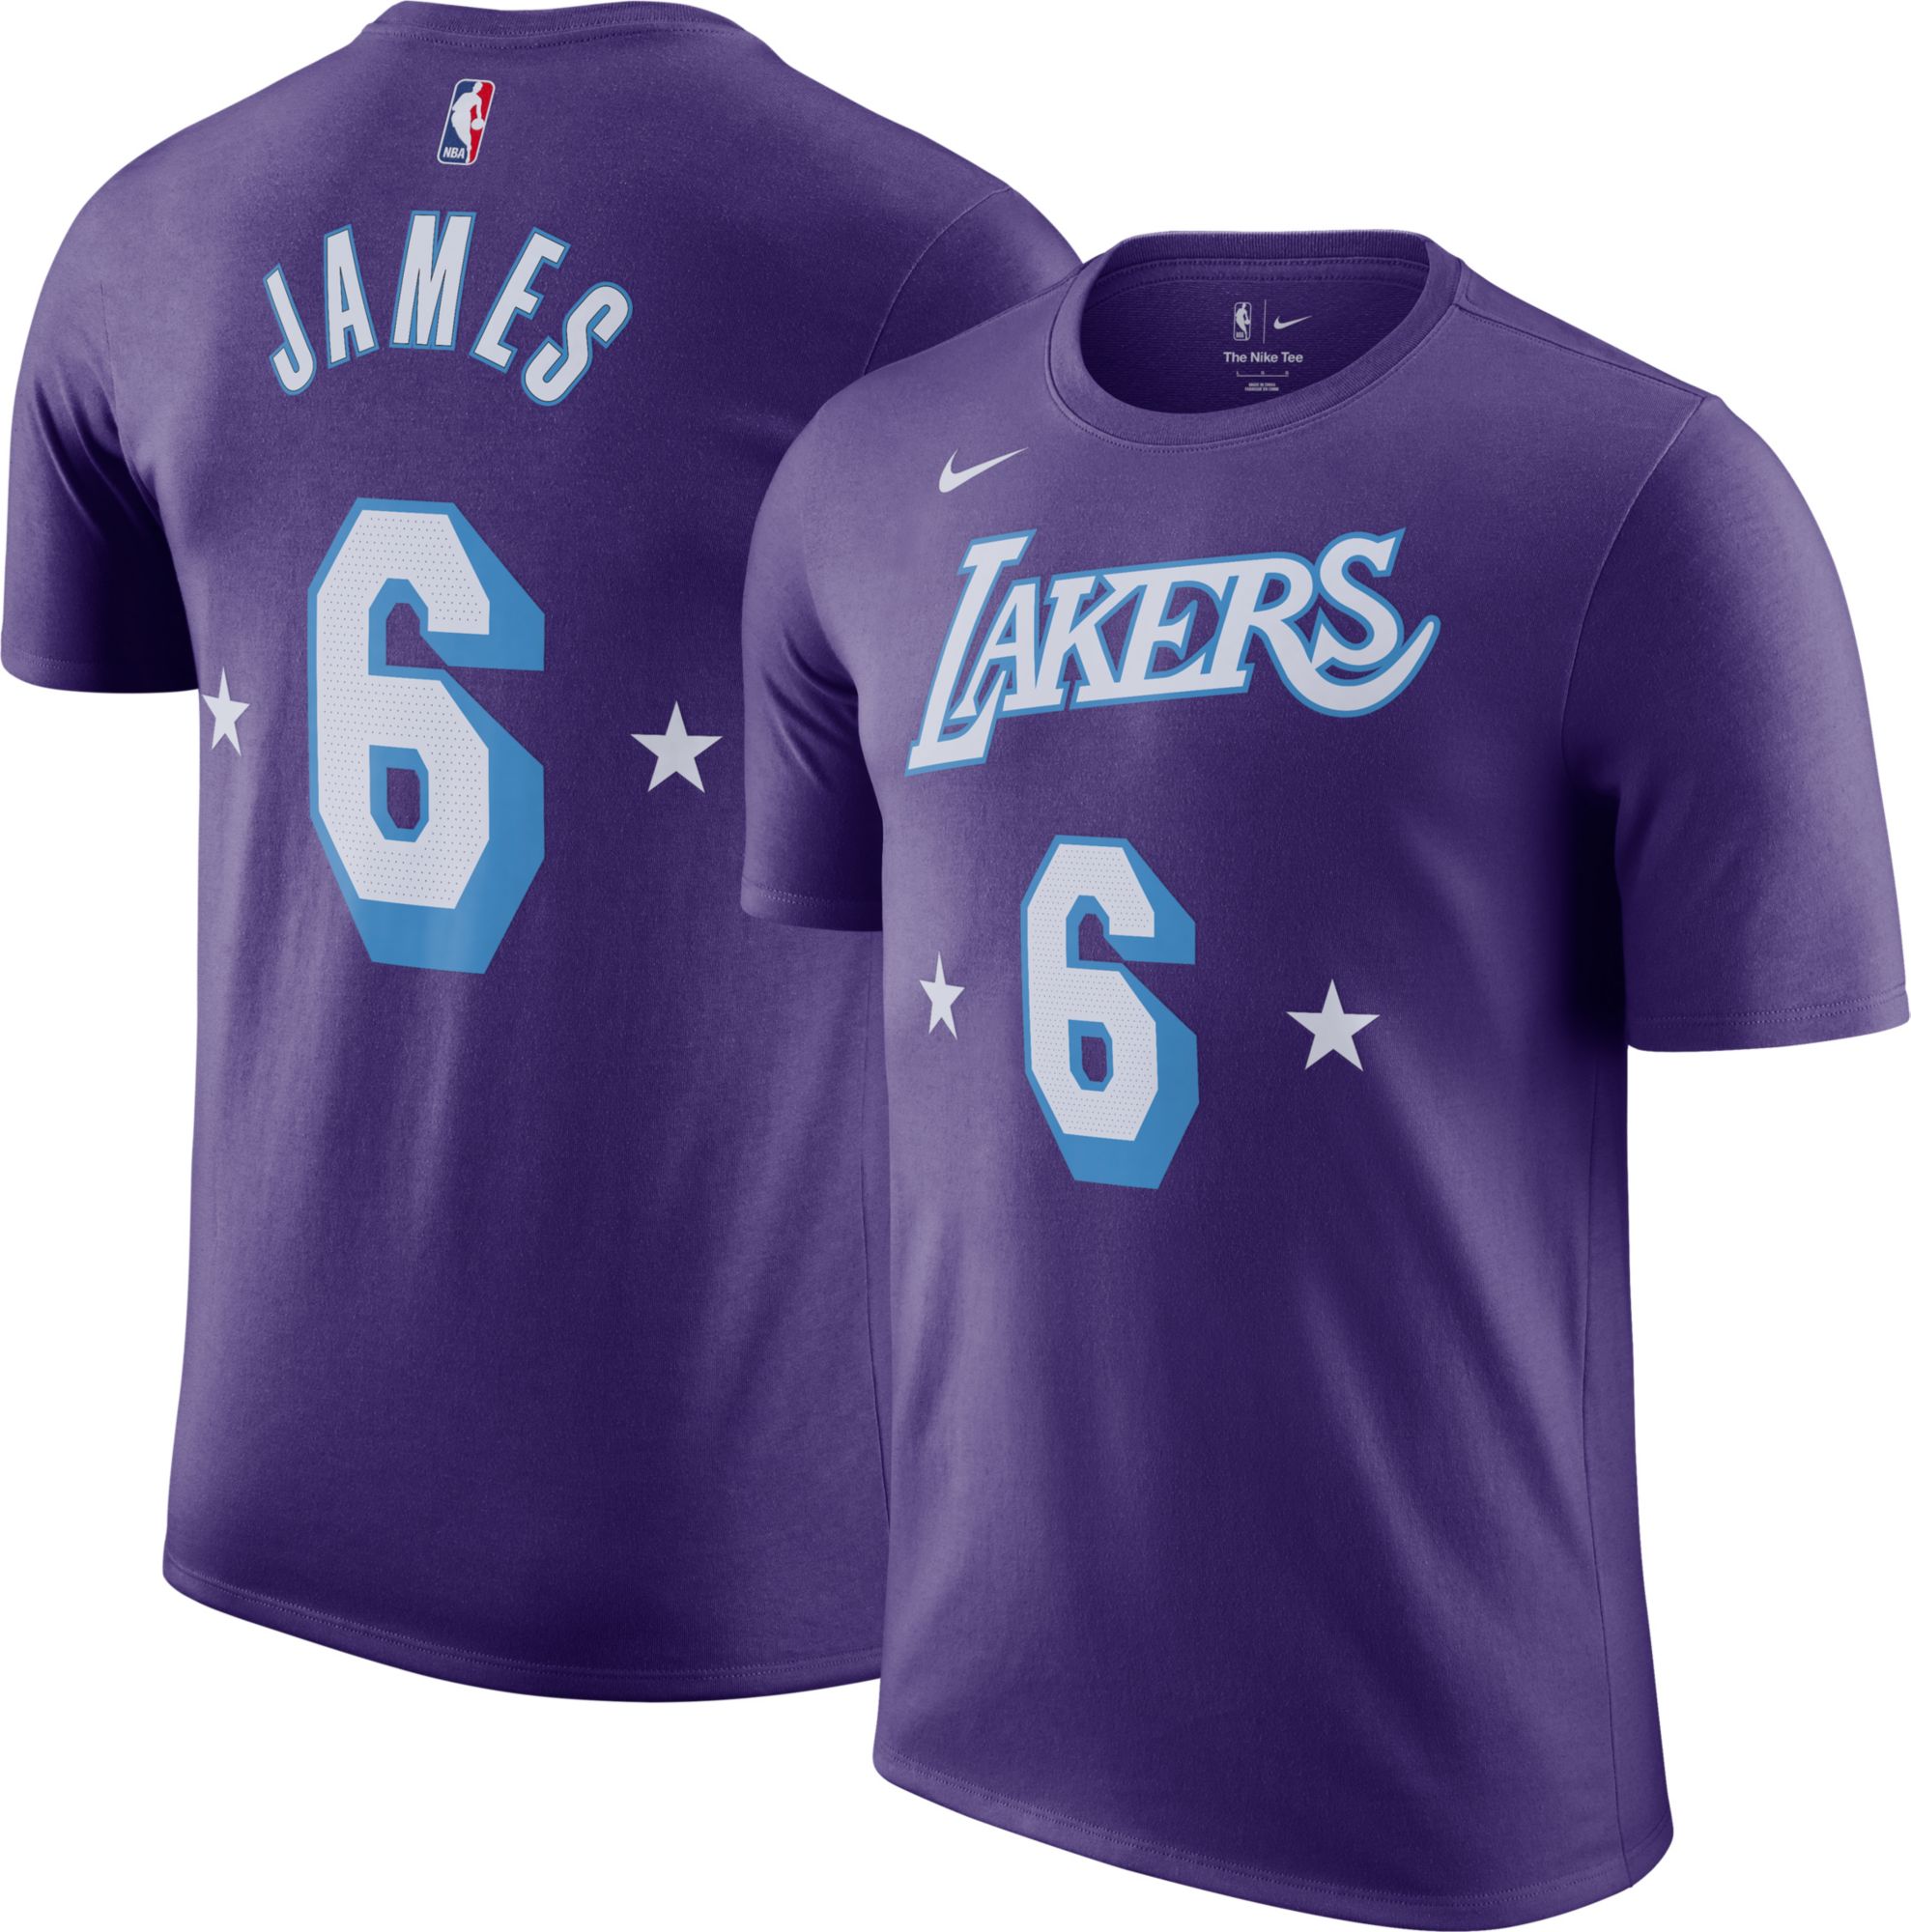 JERSEY LOS ANGELES LAKERS - CITY EDITION 2021